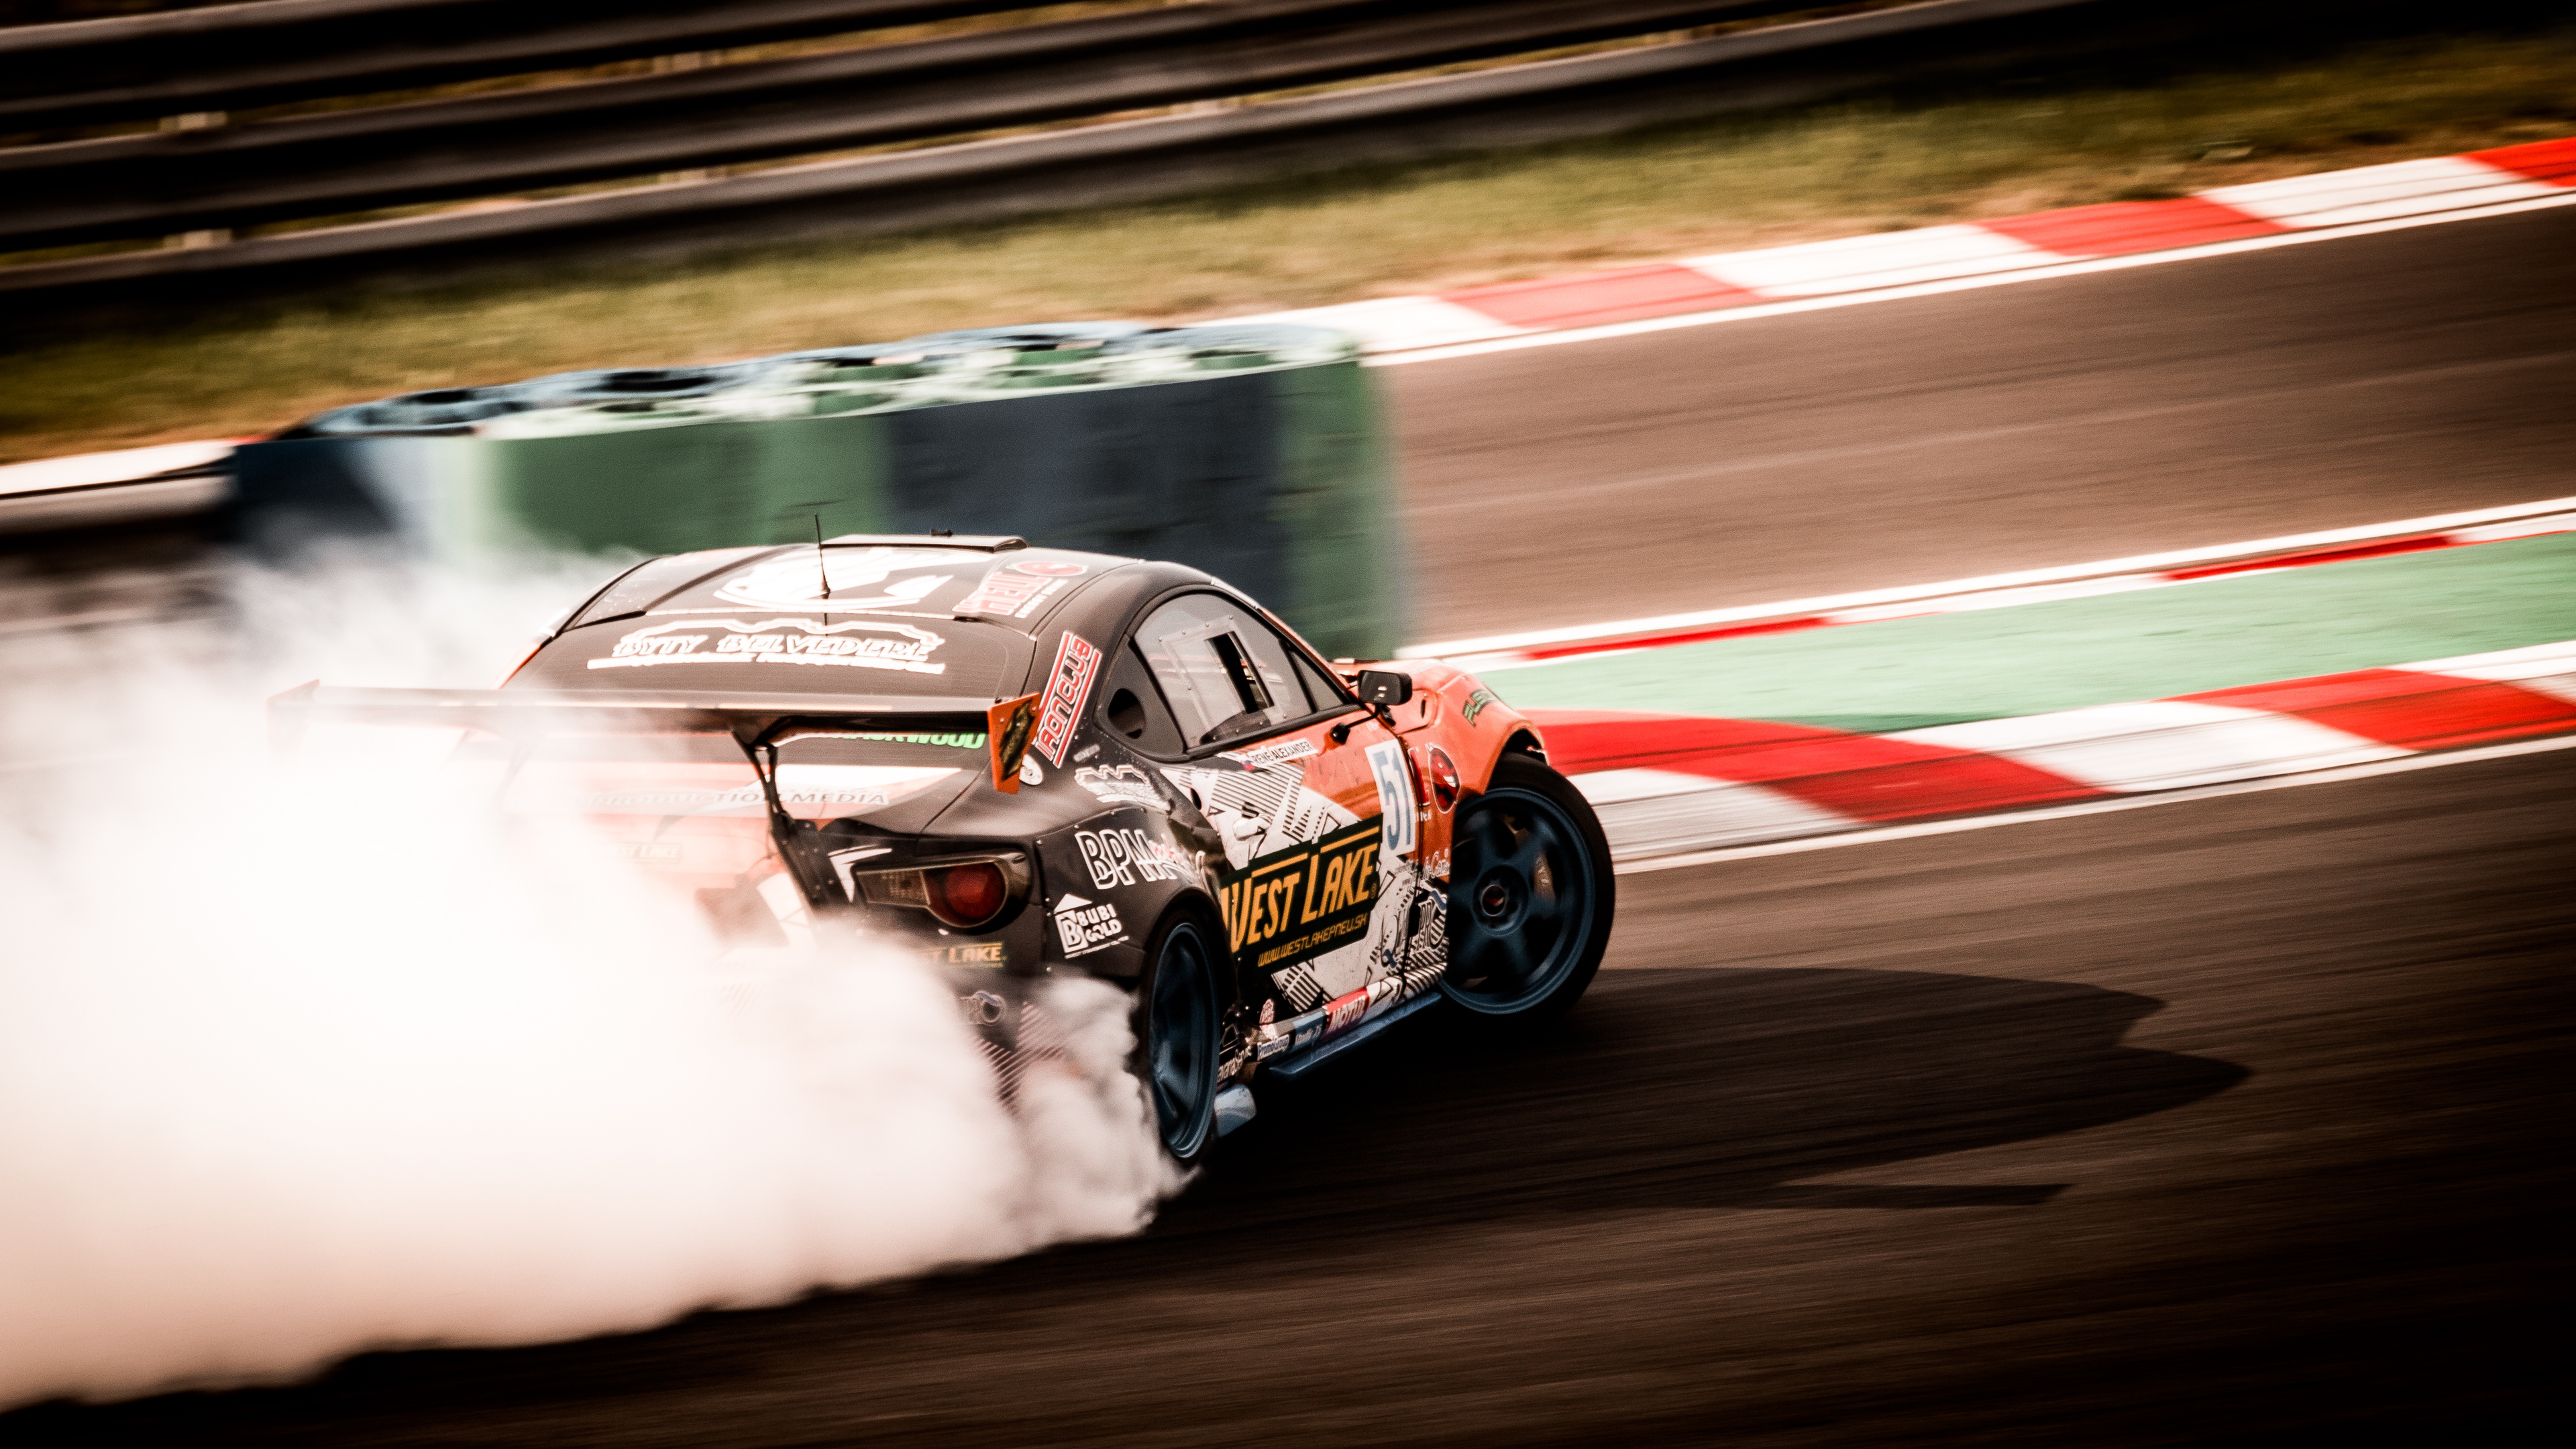 Drifting: Toyota Supra at the motorsports event, West Lake drift cup, Extreme driving. 3840x2160 4K Background.